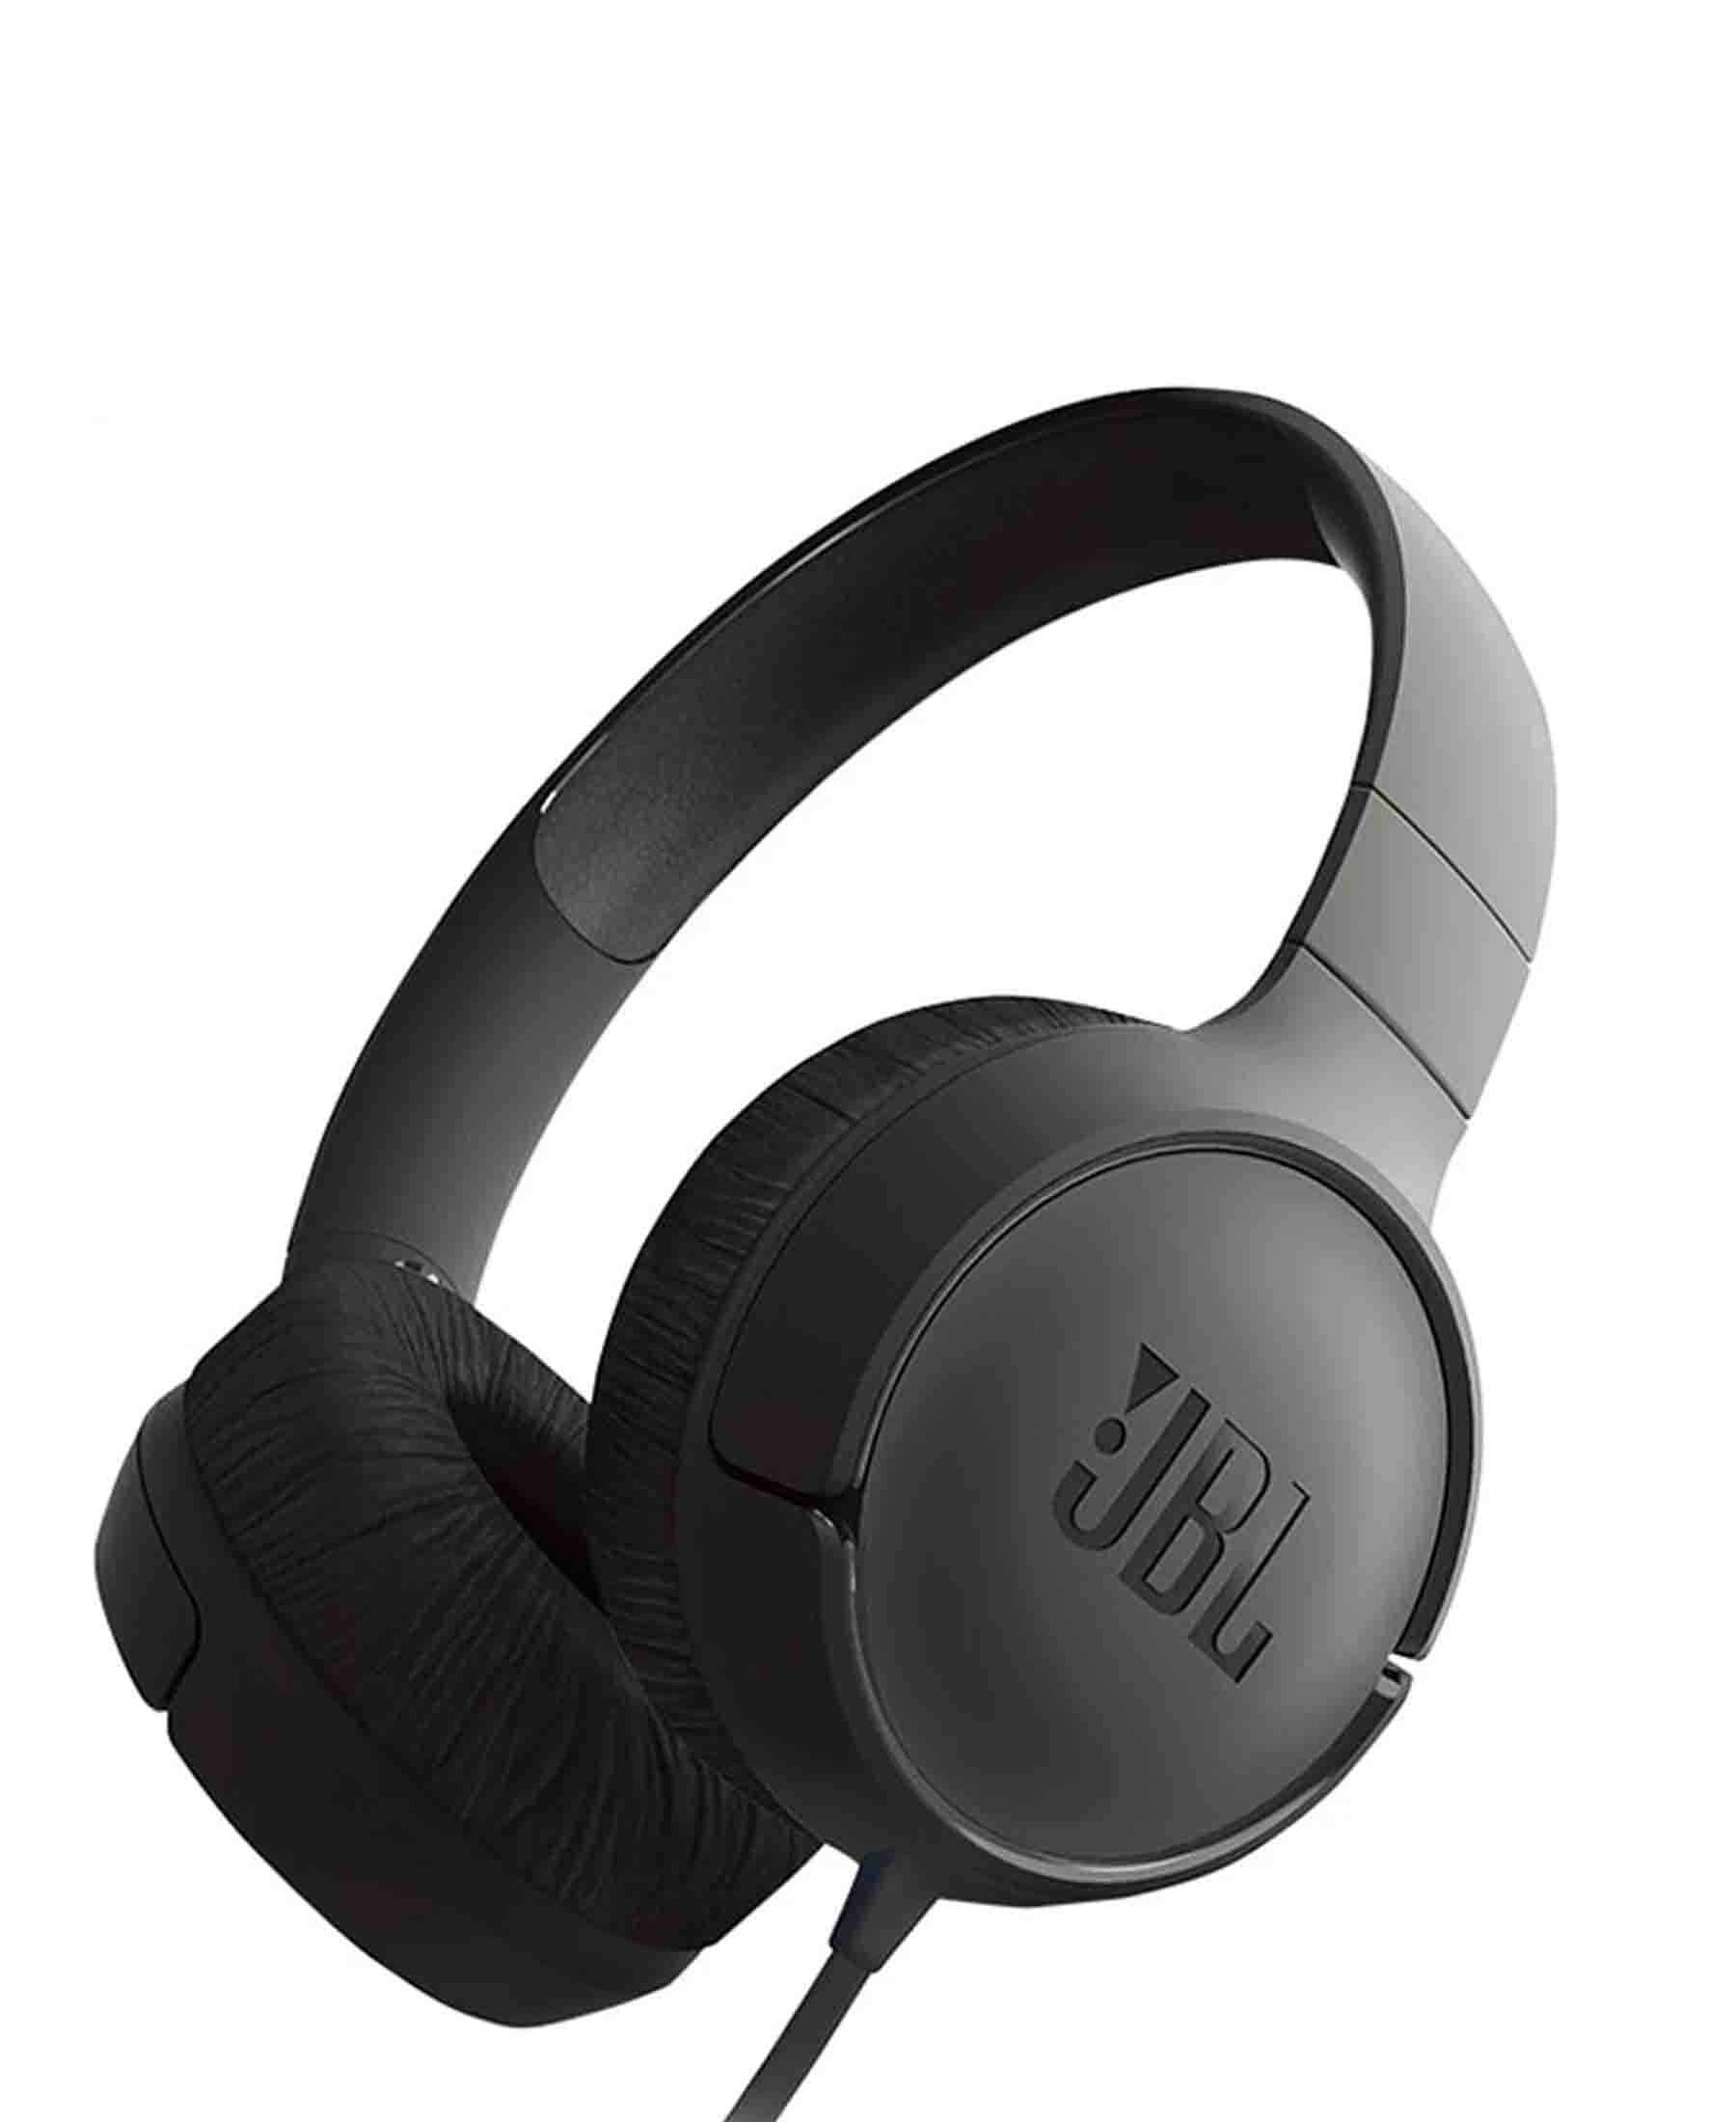 JBL Tune 500 Wired On Headphones With Mic Black – The Culinarium